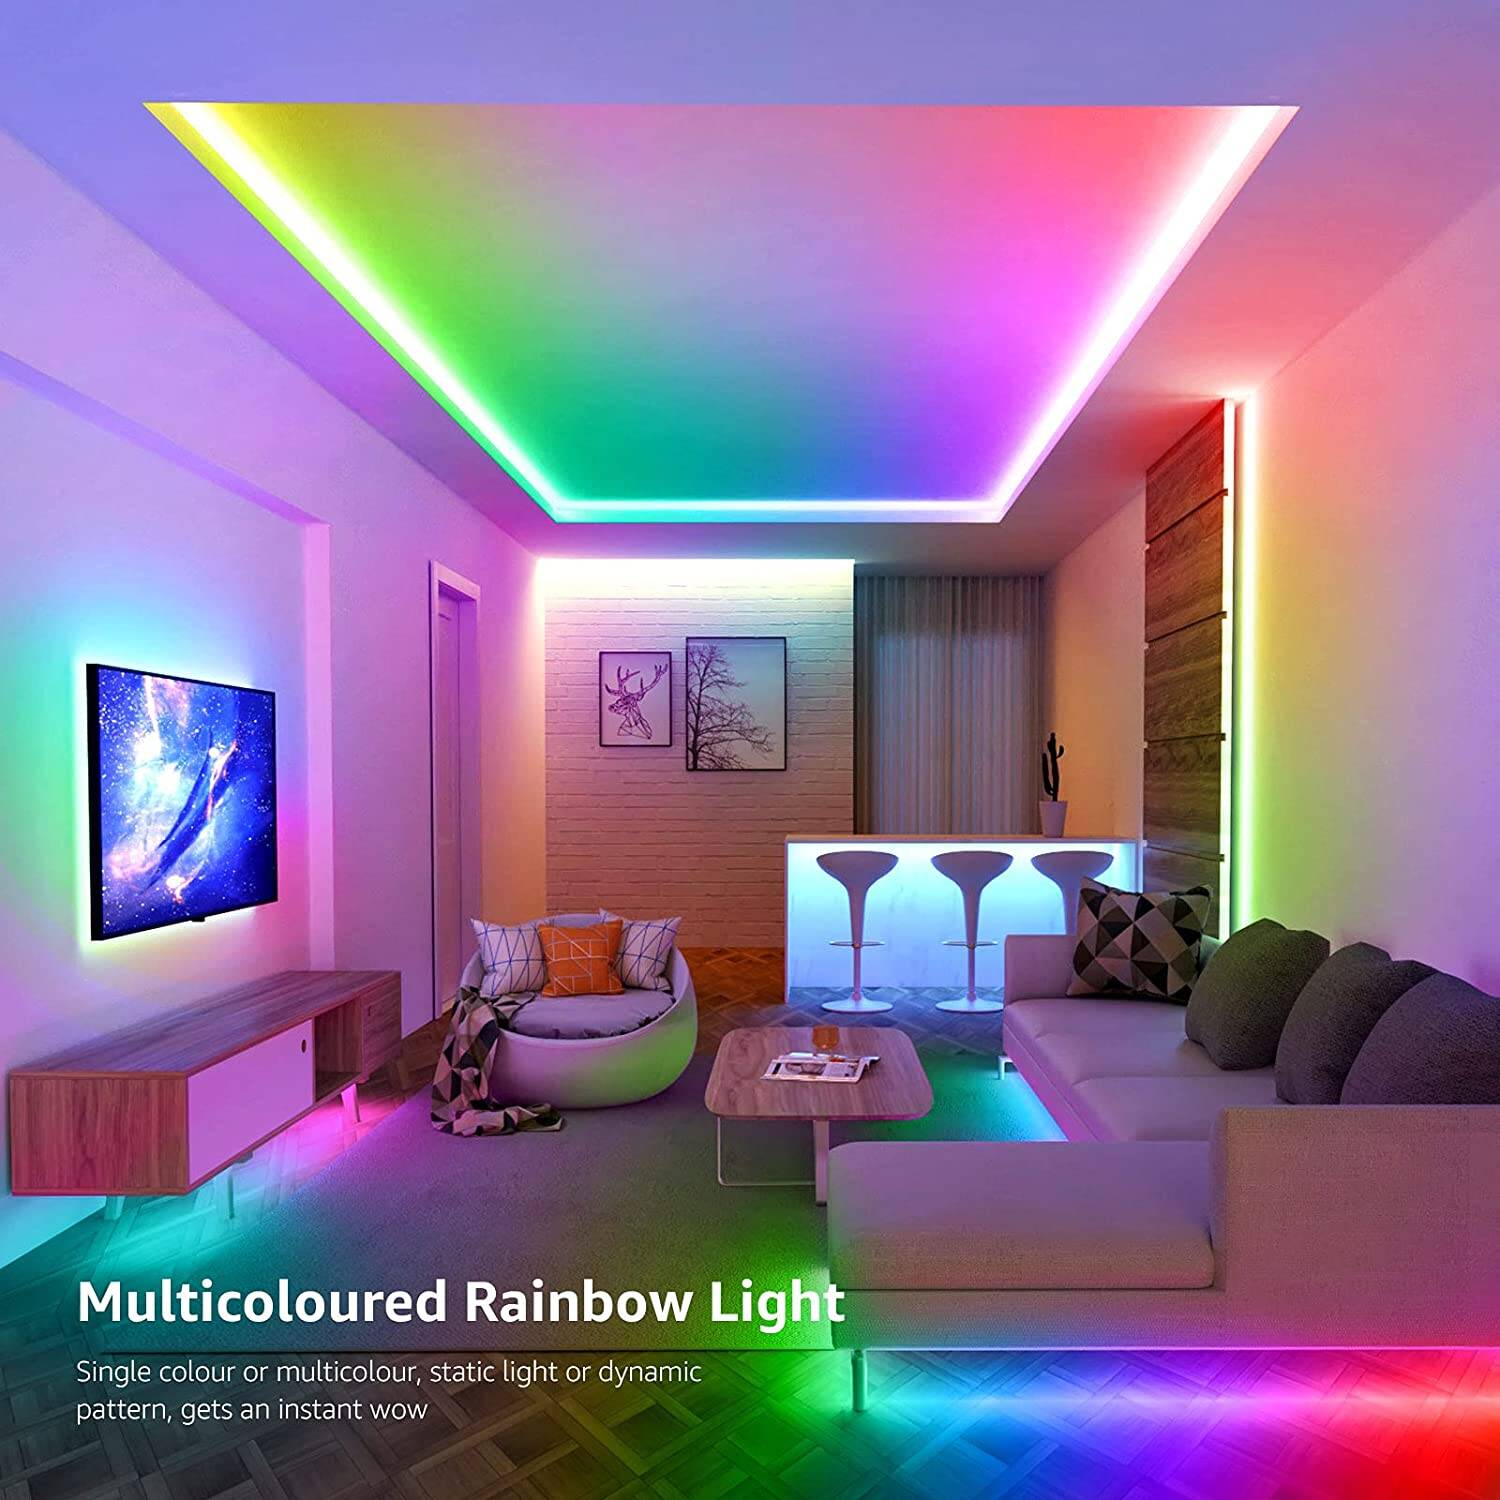 LEPRO RGBIC LED strip 15M Set (2x7,5M)Running light Dreamcolor, MagicColor  with remote control IP65, Dimmable